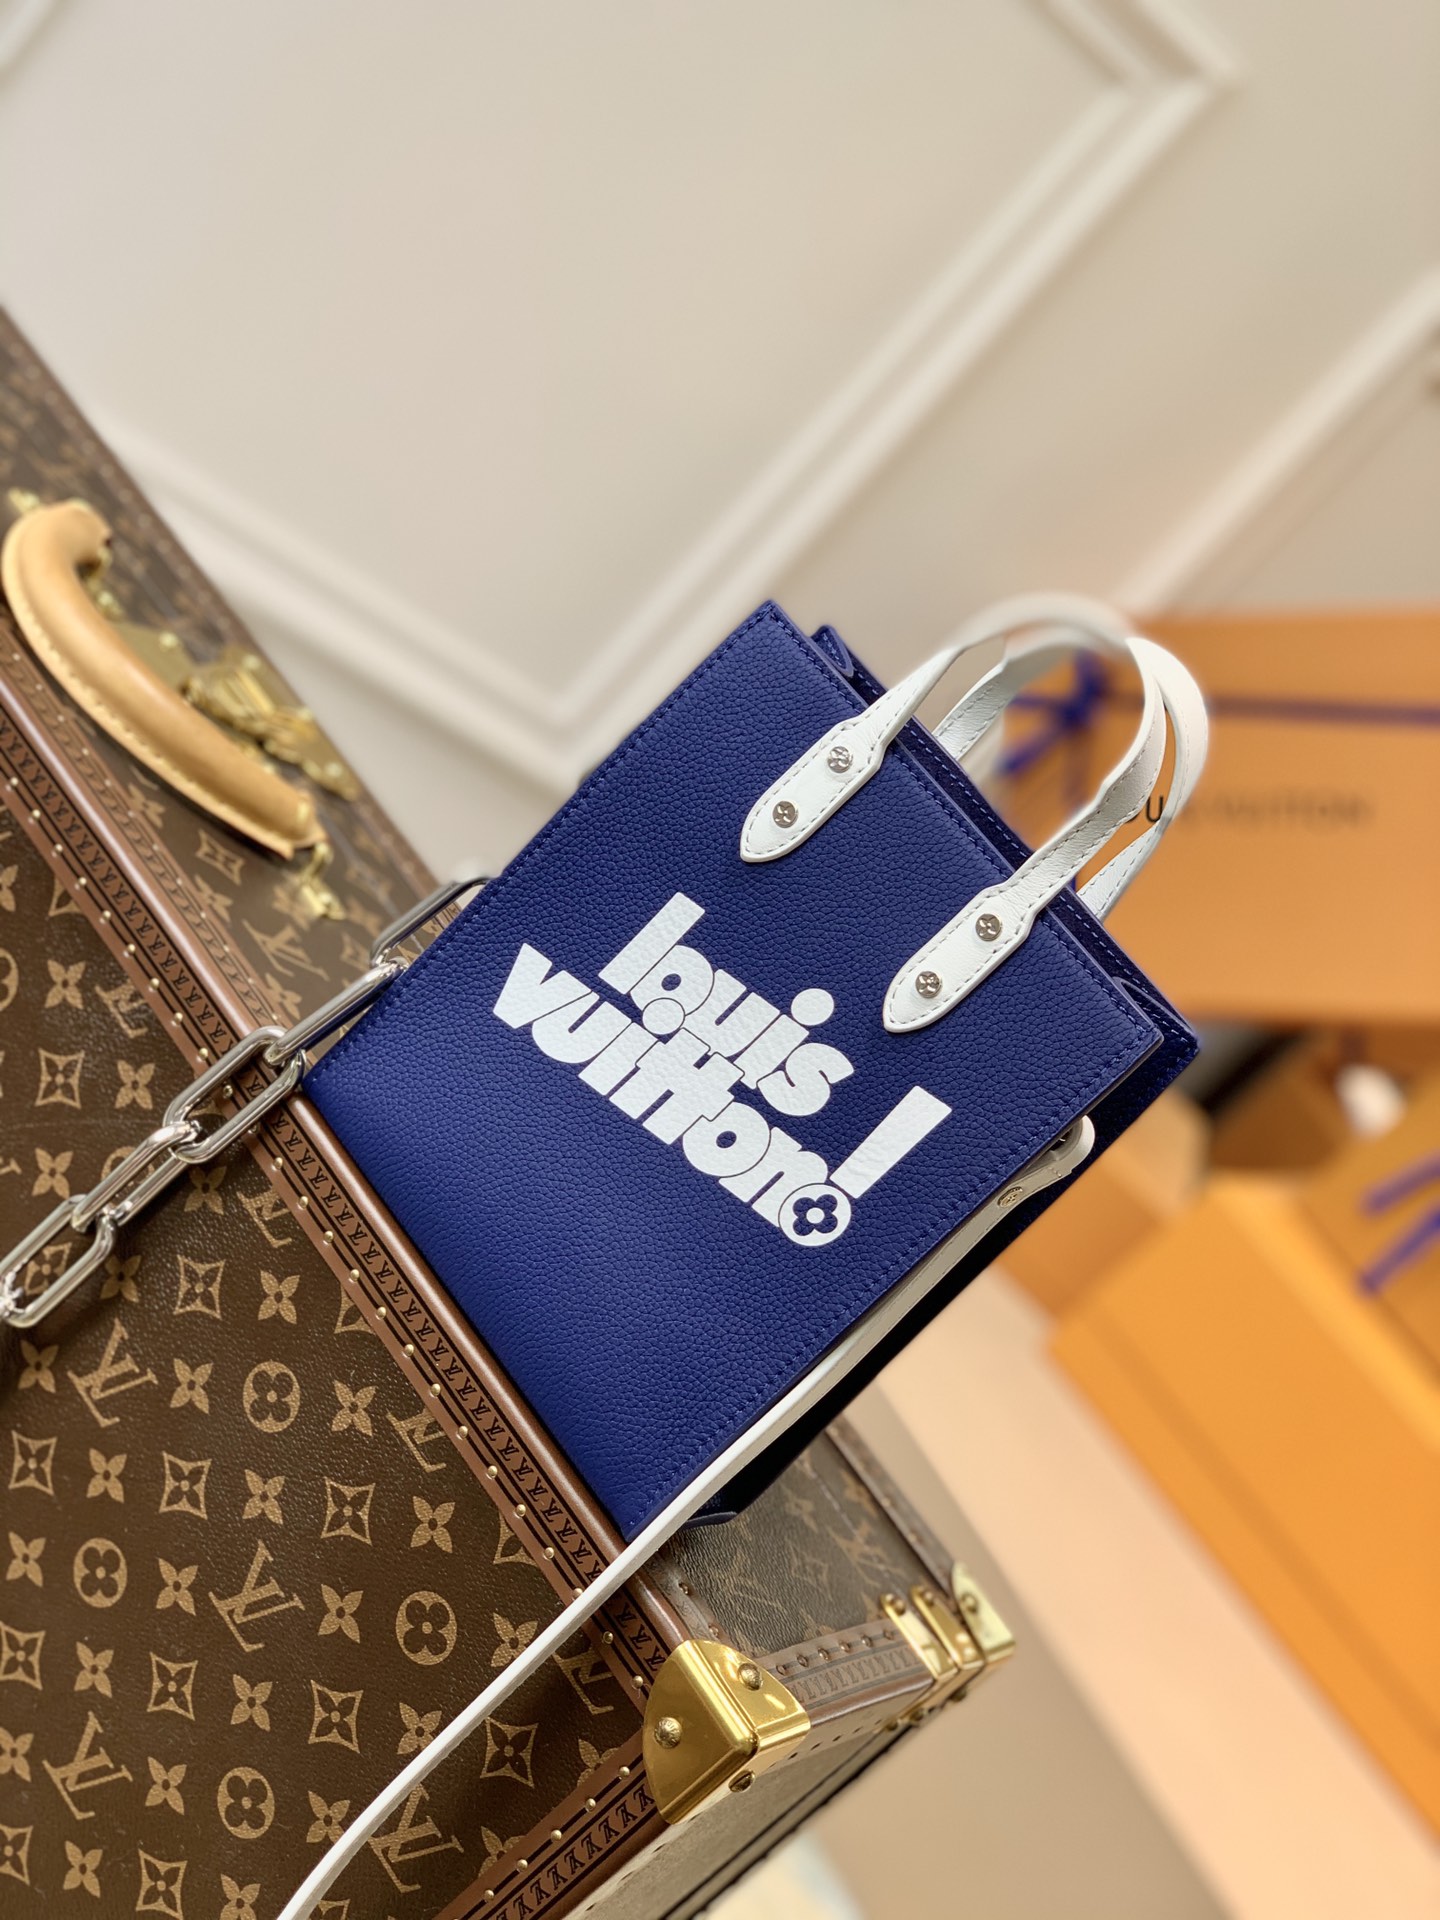 Replica Louis Vuitton Blue & White Leather Everyday LV Sac Plat XS - Handbag | Pre-Owned & Certified | Used Second Hand | Unisex